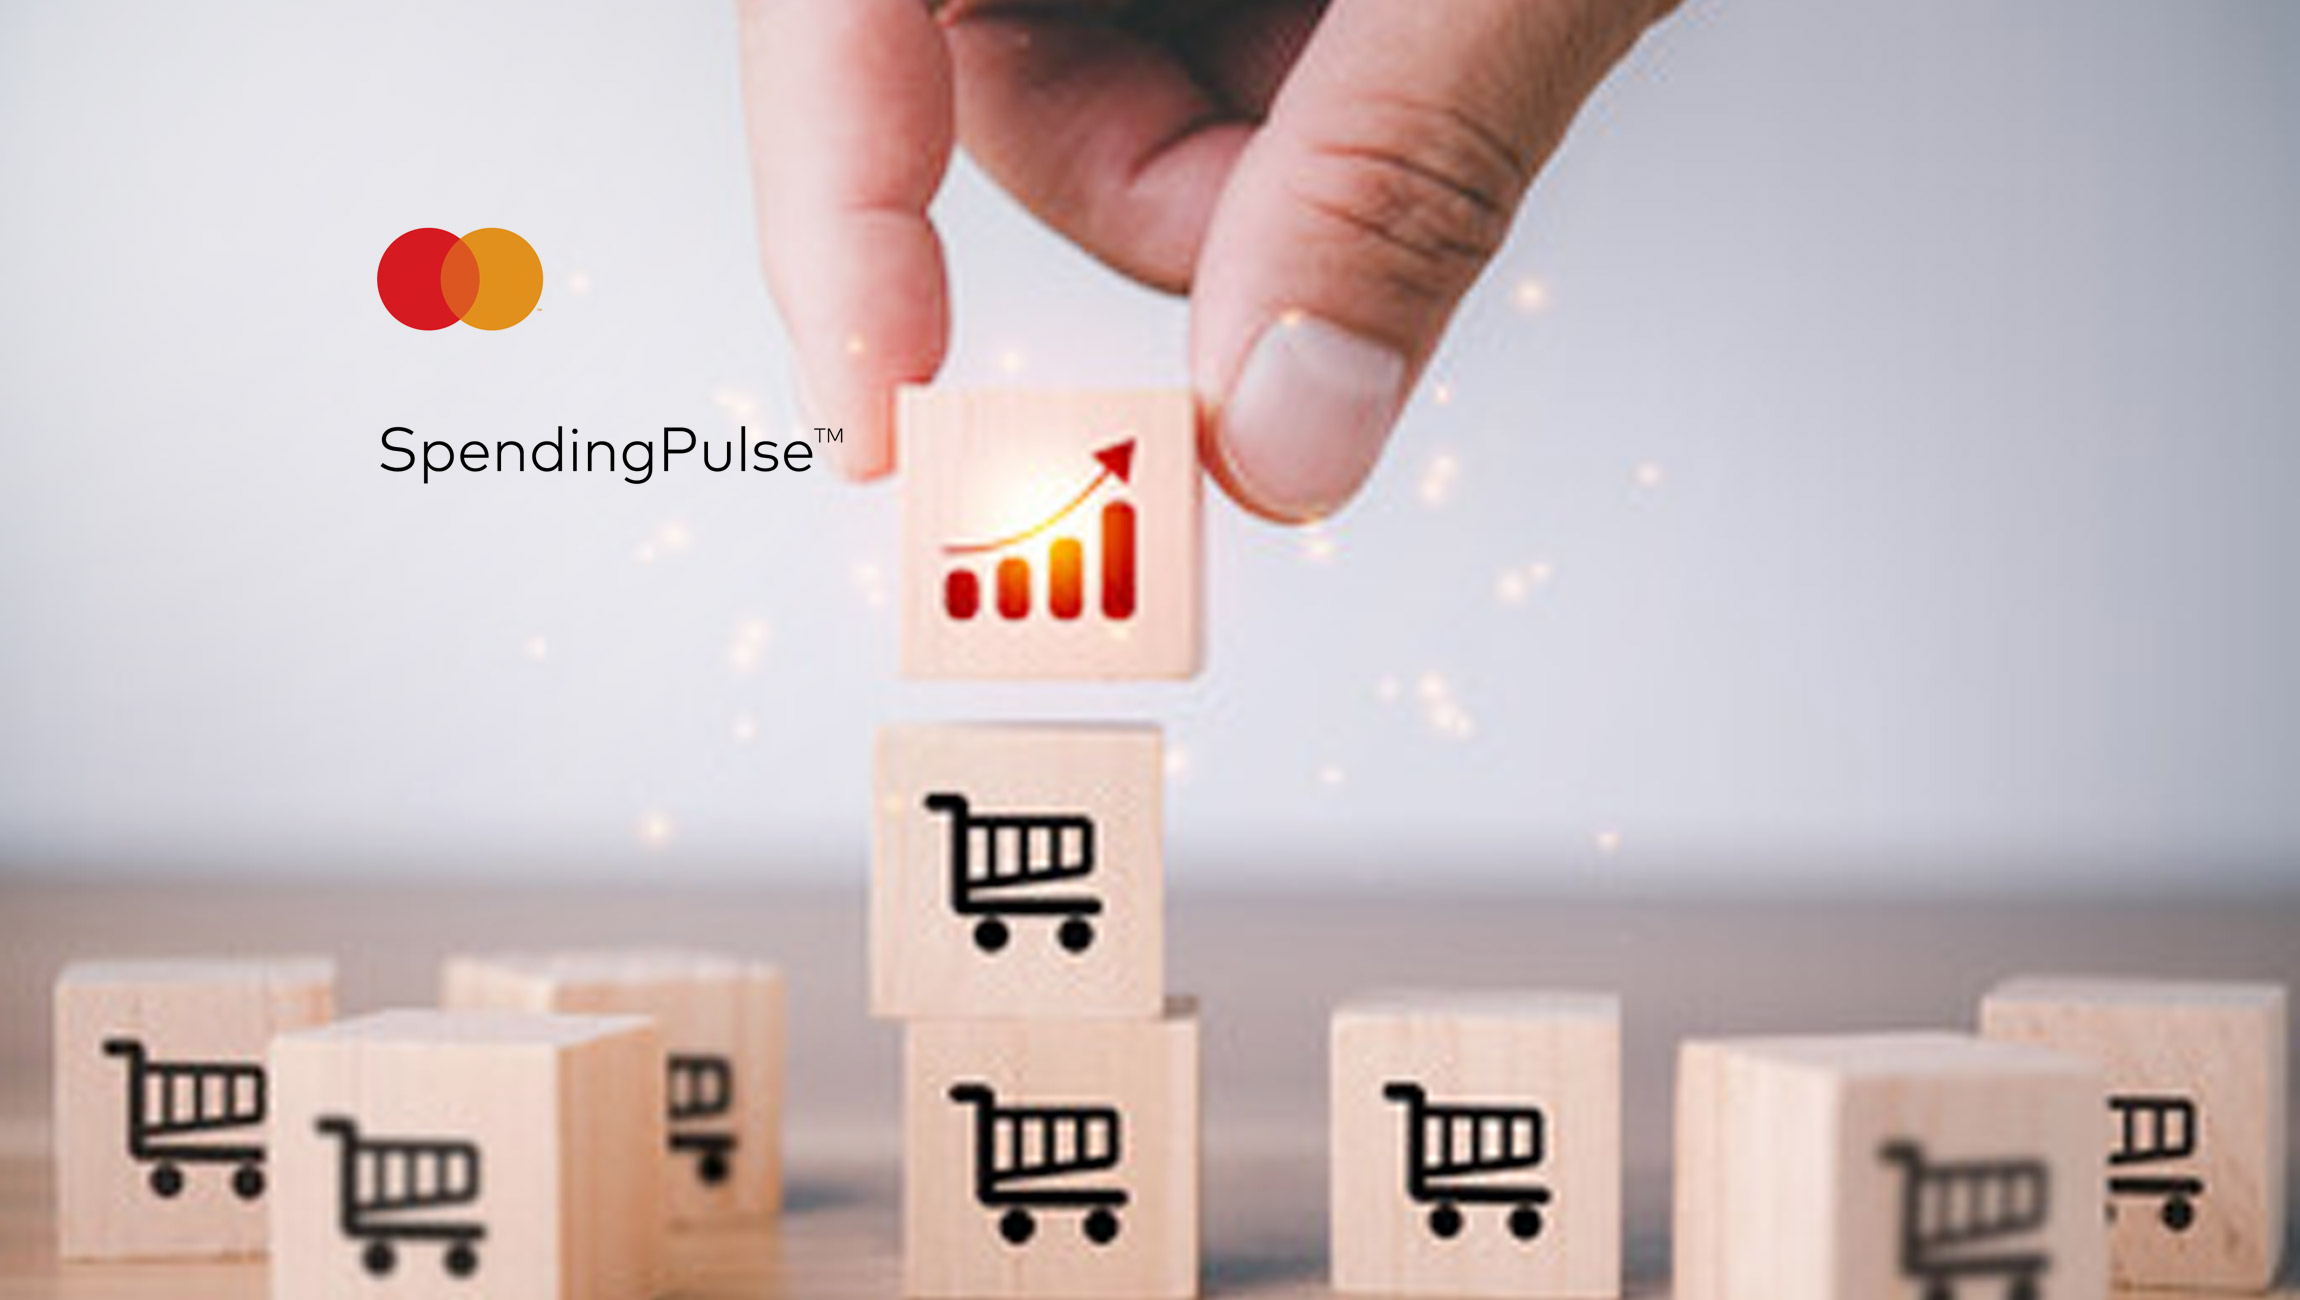 Mastercard SpendingPulse Expands Across Europe with Insights Pointing to Solid Retail Sales Growth